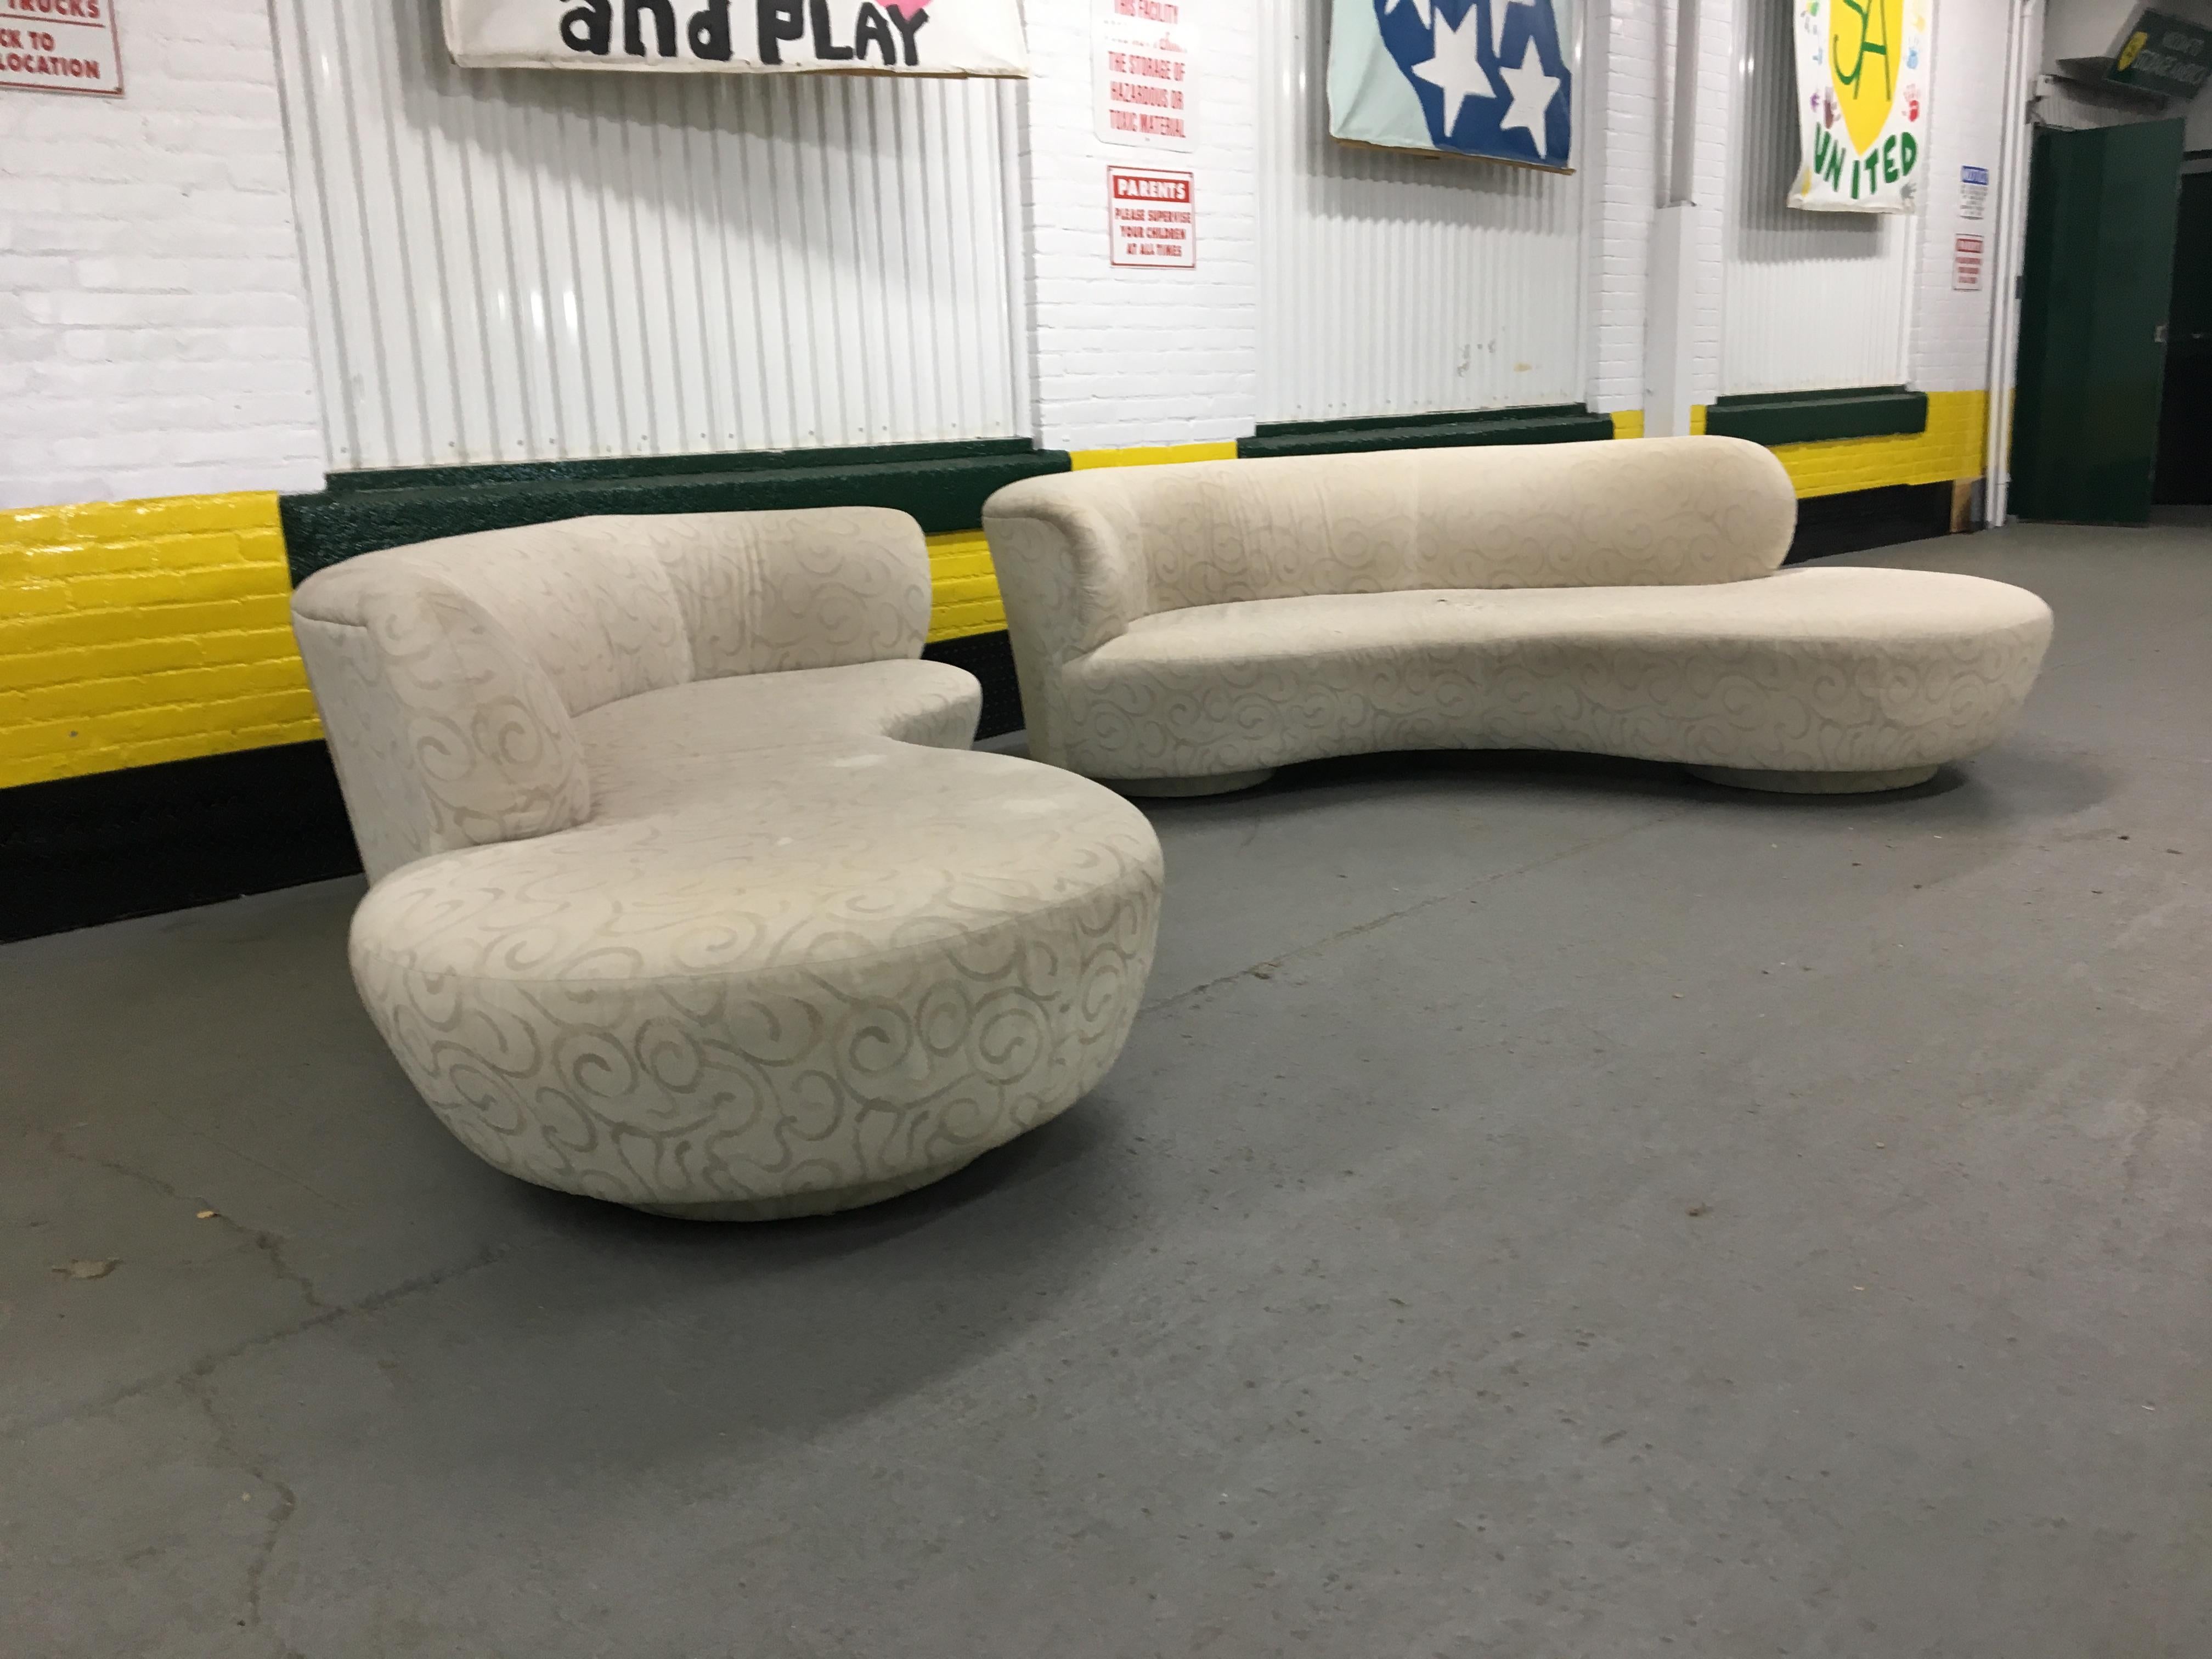 Pair of matching 'Cloud' sofas designed by Vladimir Kagan for Weiman.
Upholstery is worn and needs to be replaced. Cushions are in nice shape.
Buy one or a both at check-out.
Each sofa is 96